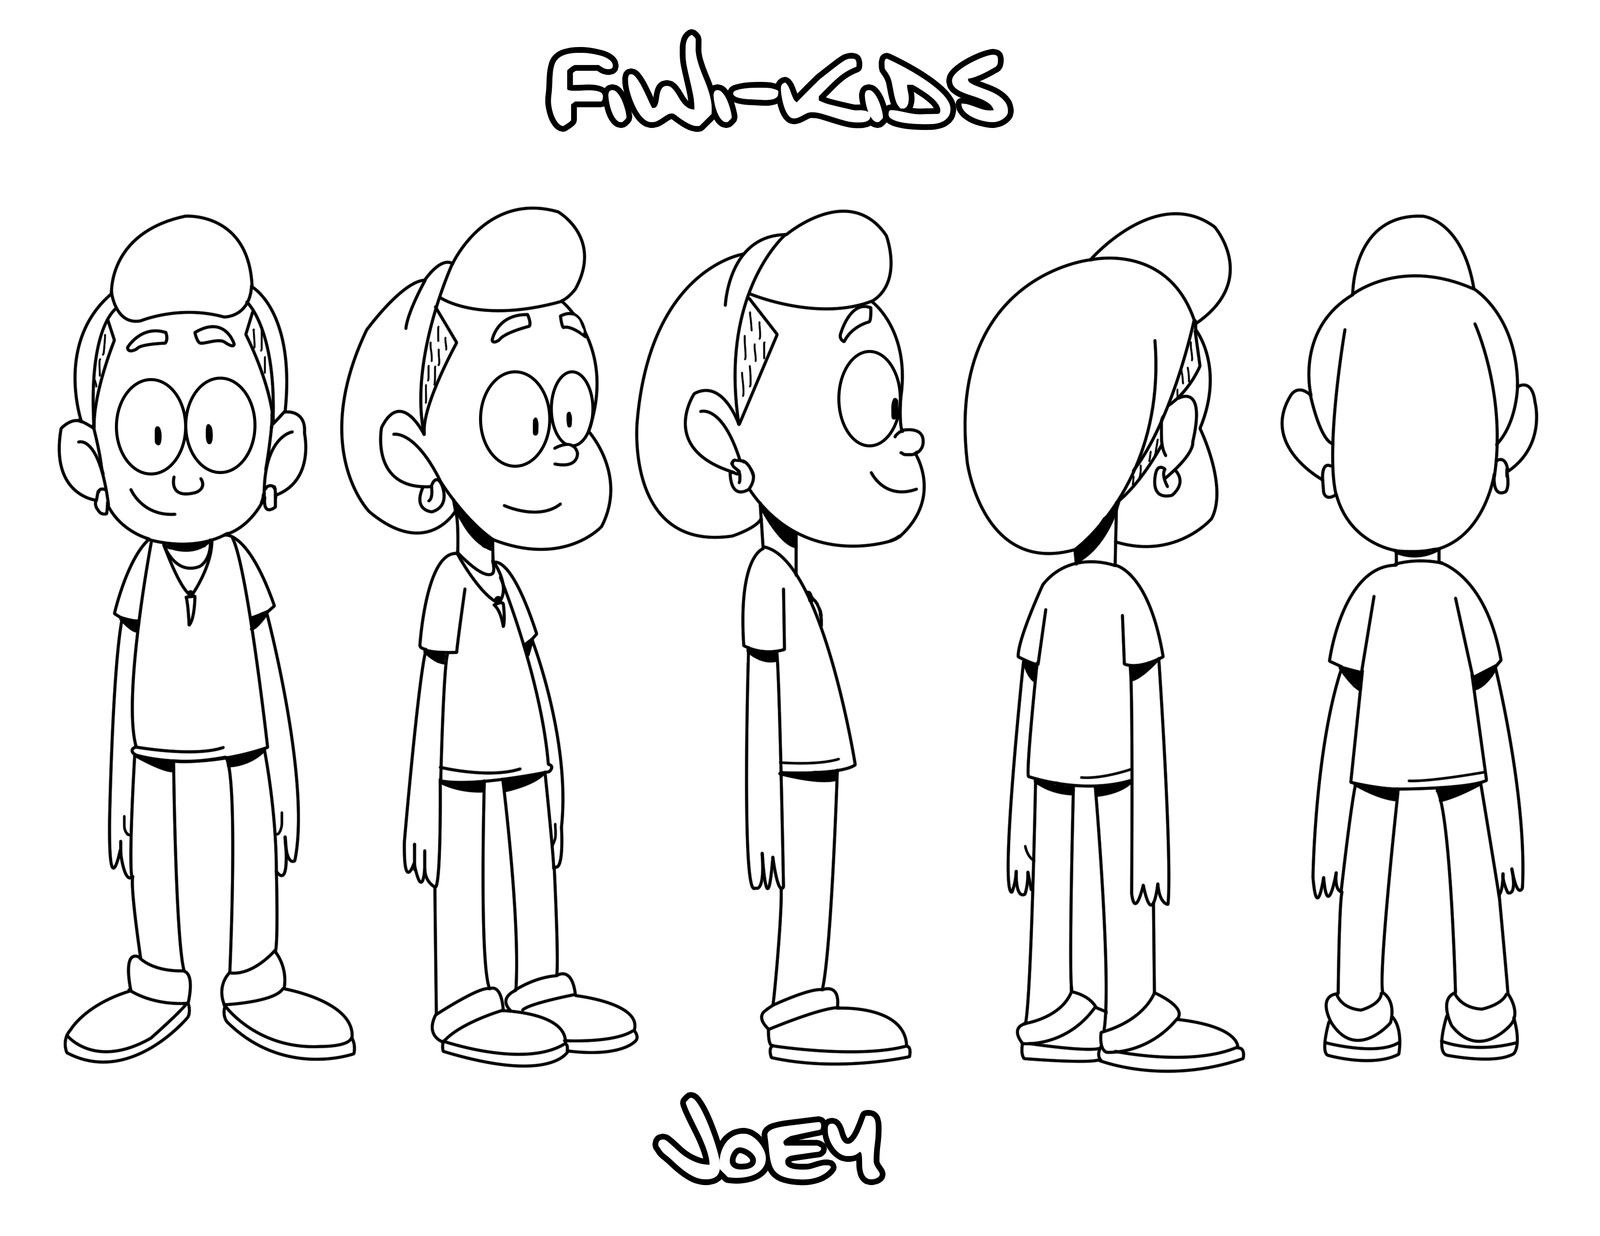 Character designs + turnarounds + model sheets for 2D animation.